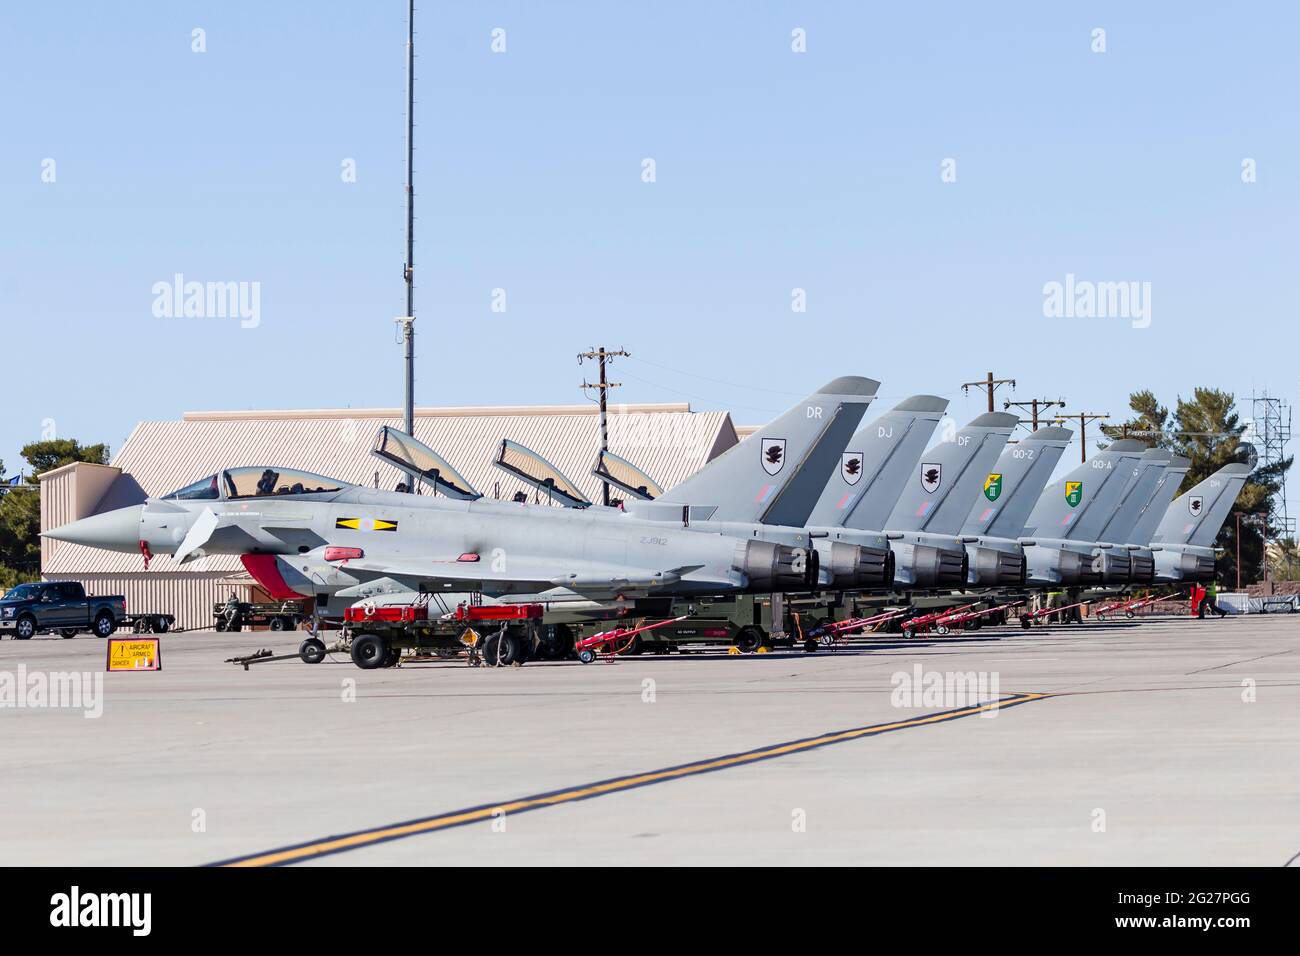 A row of Royal Air Force Eurofighter Typhoon fighters at Nellis Air Force Base, Nevada. Stock Photo